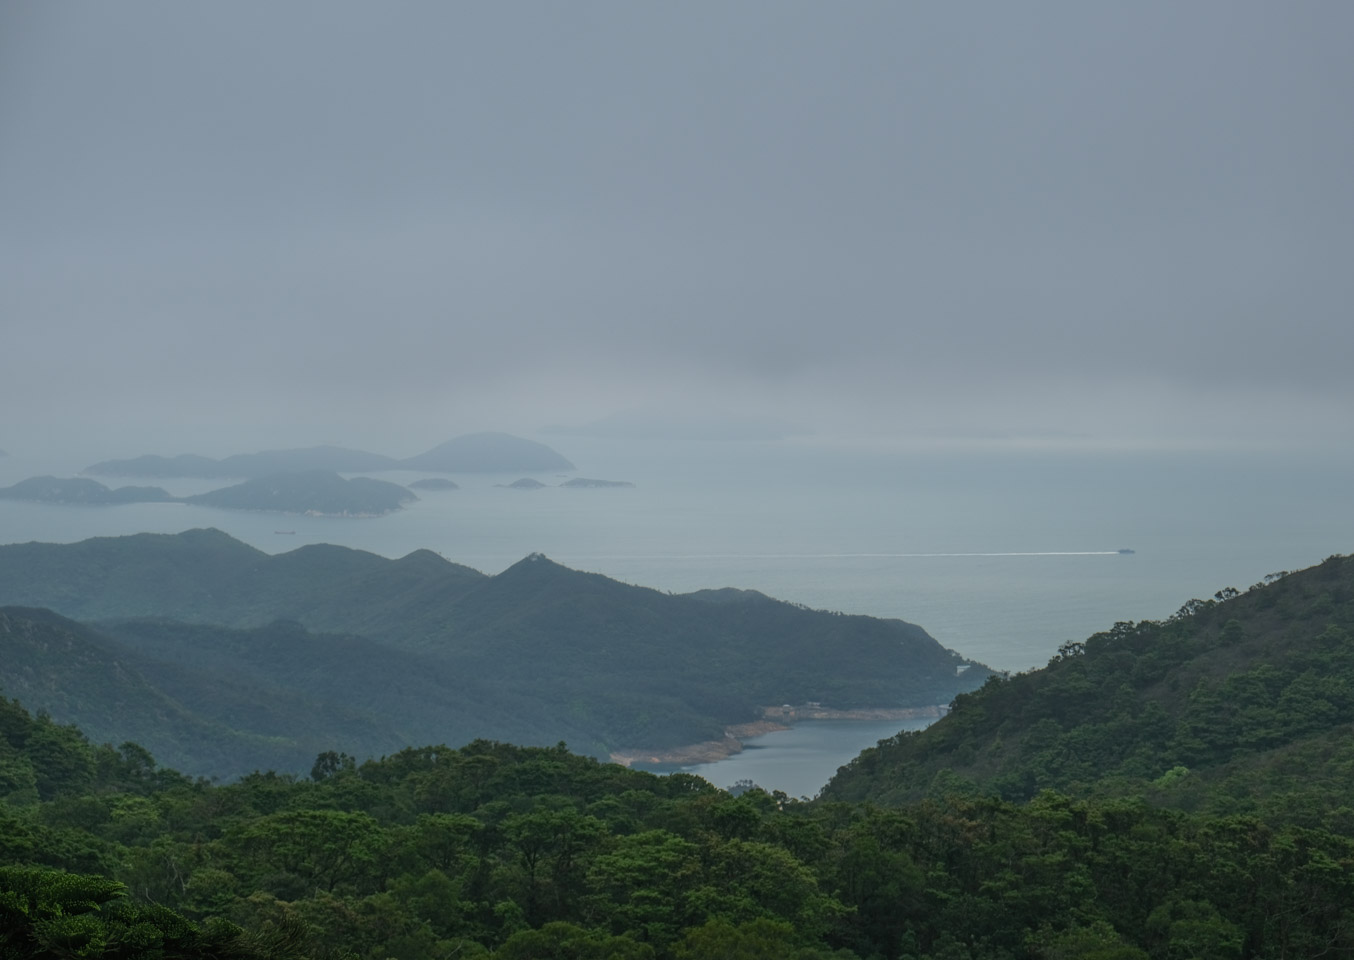 The view out to see from the Tian Tan Buddha